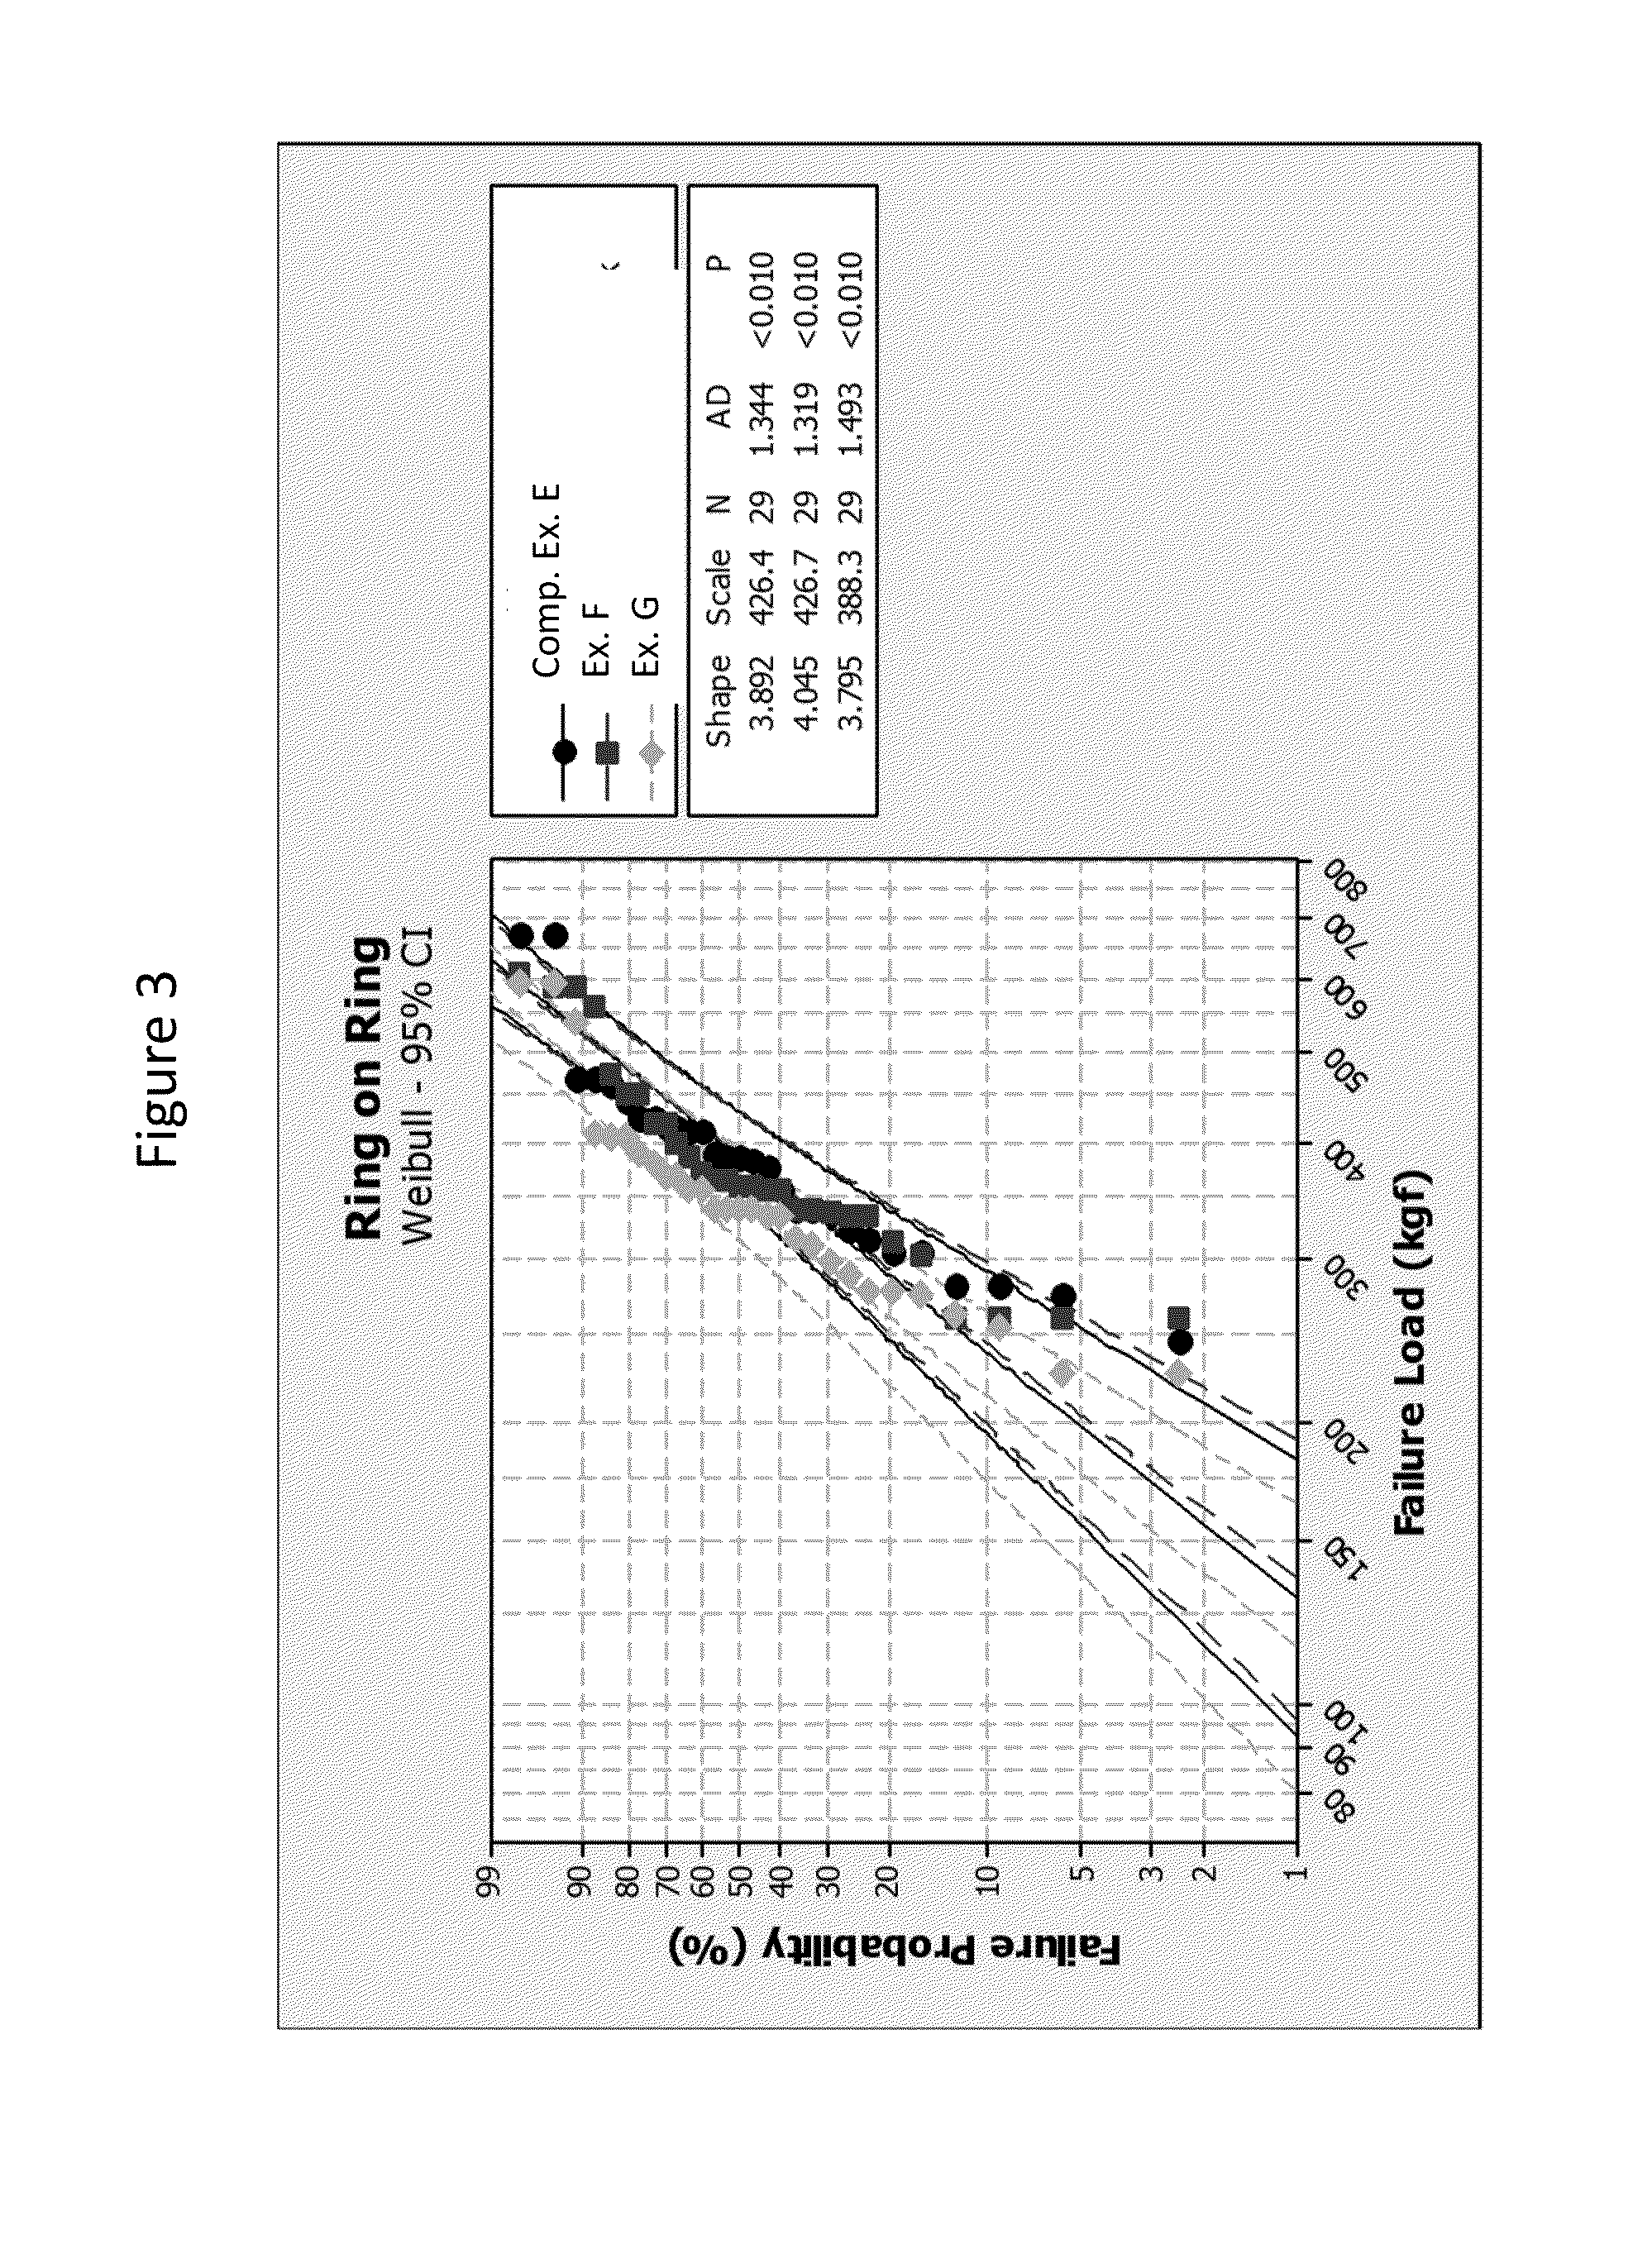 Antimicrobial Articles and Methods of Making and Using Same